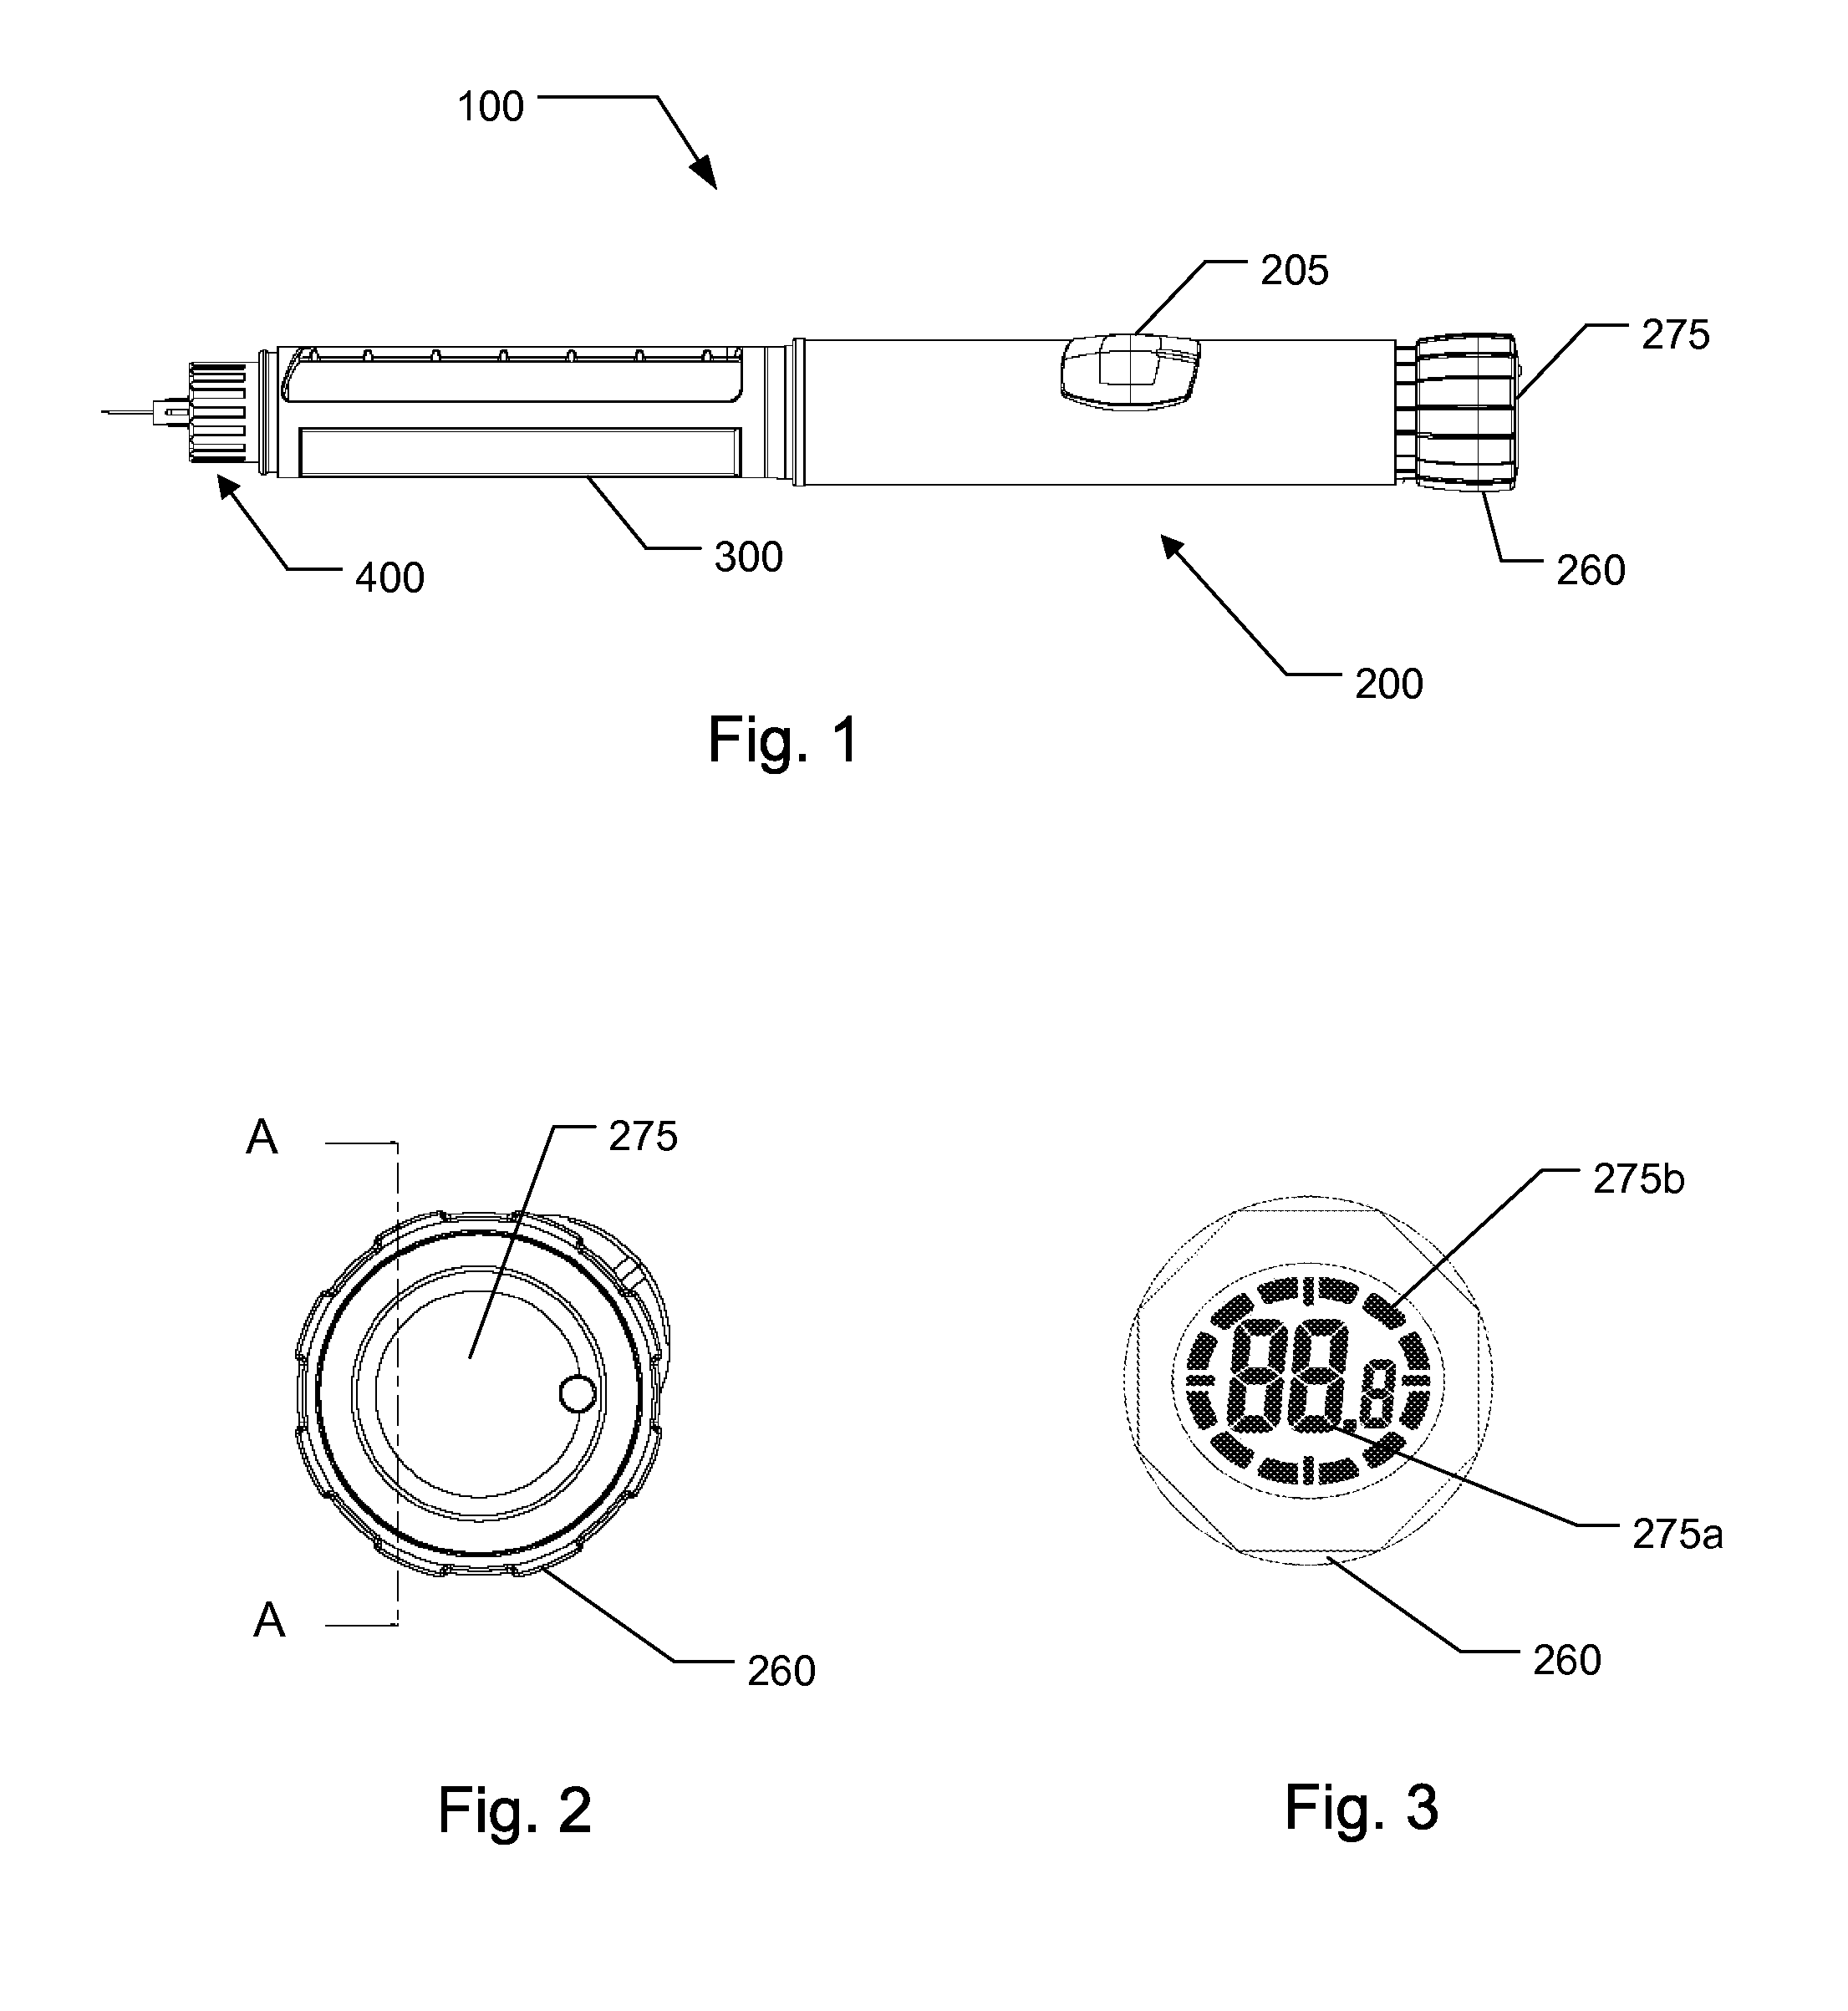 Electronically assisted drug delivery device